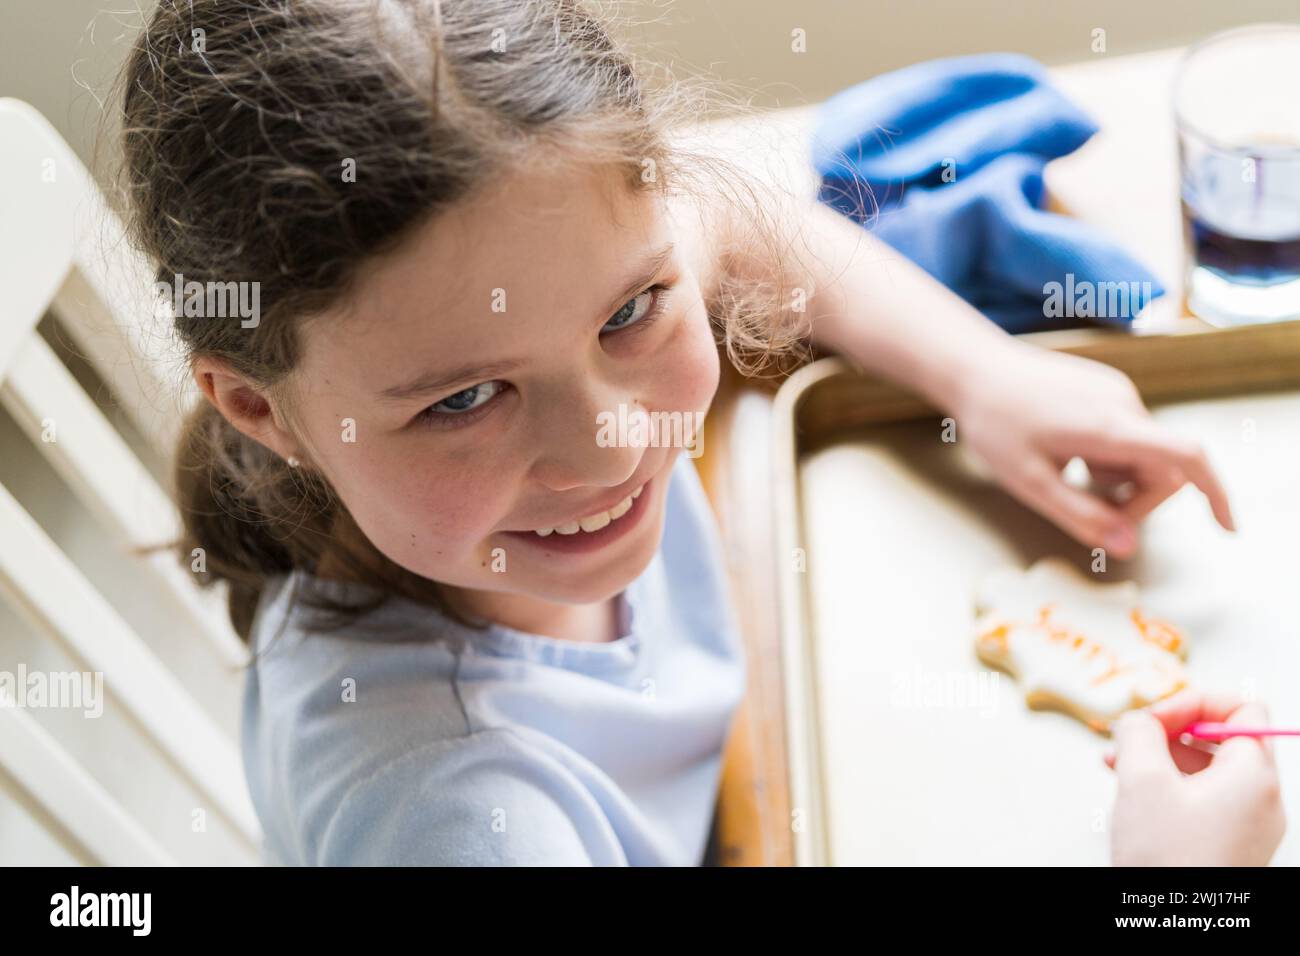 Little Girl Spells 'Sorry' on Iced Sugar Cookies Stock Photo